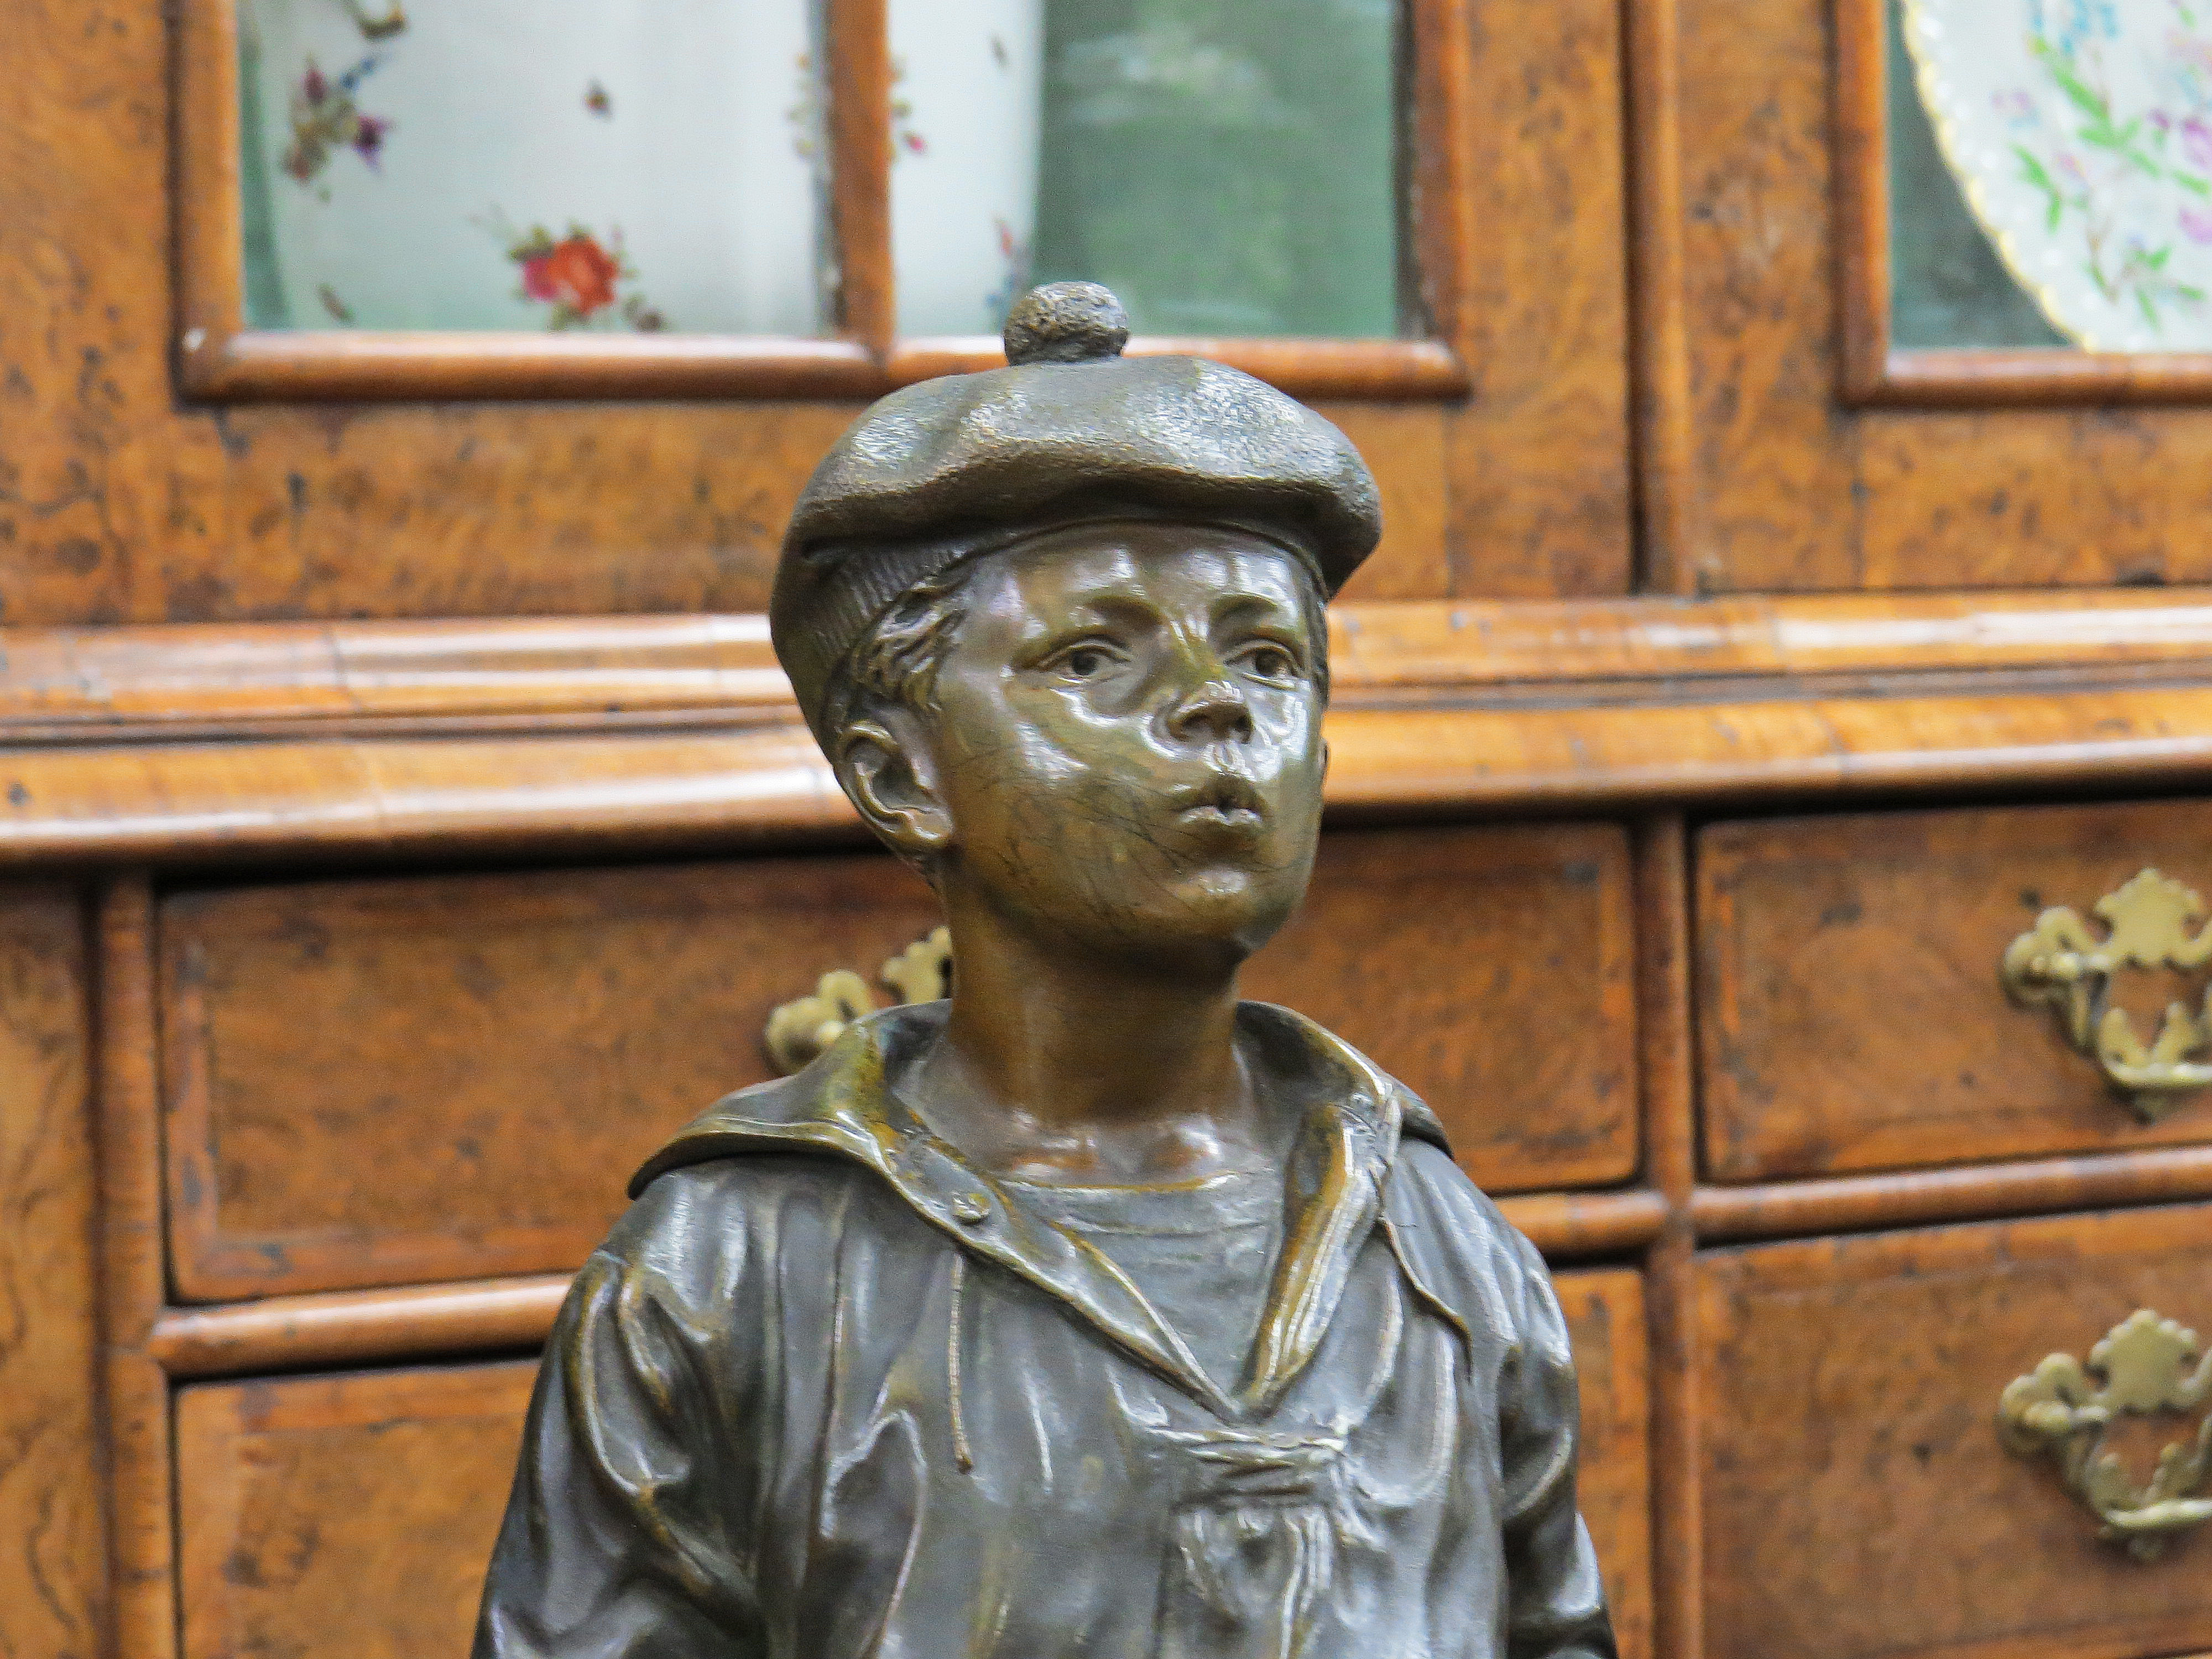 Polish Bronze Sculpture of a Young Boy Whistling